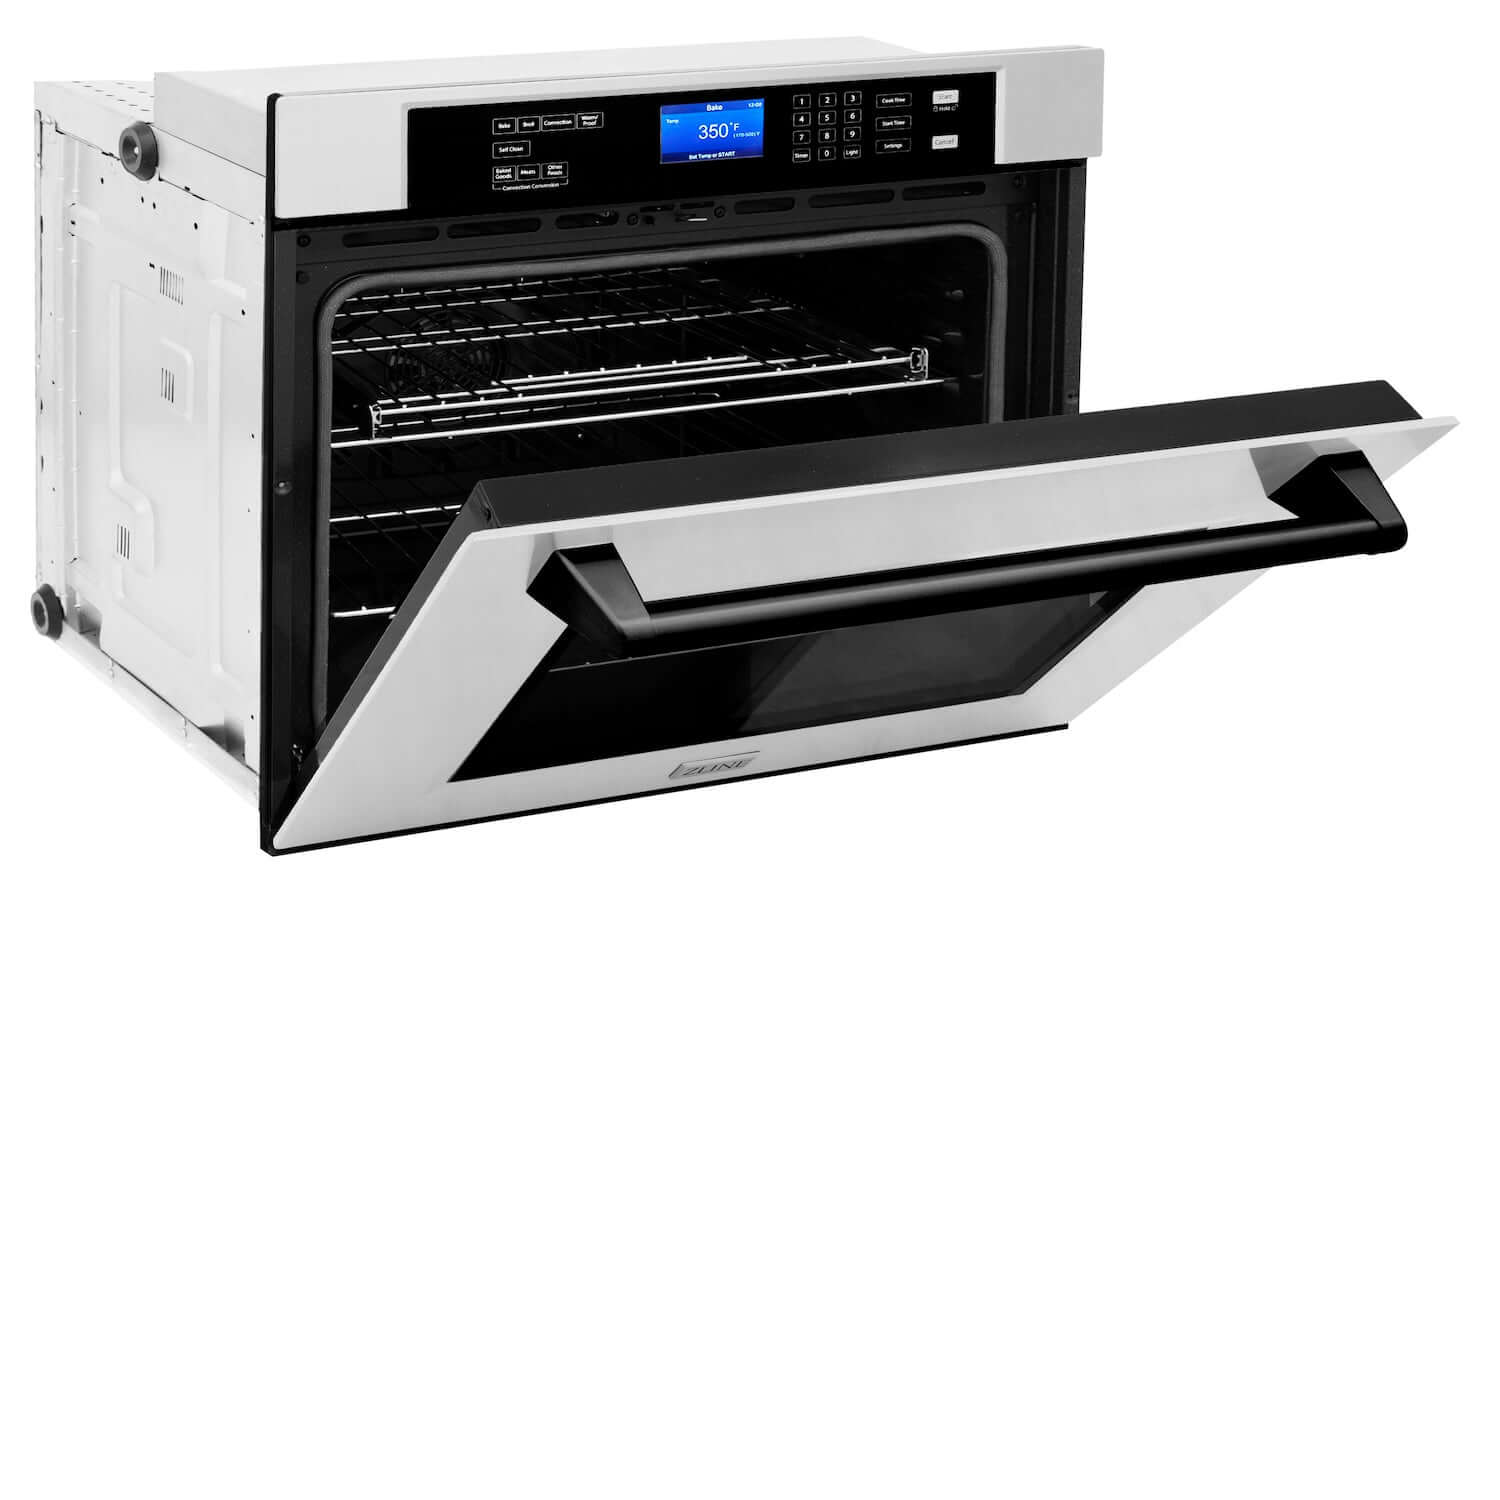 ZLINE Autograph Edition 30 in. Electric Single Wall Oven with Self Clean and True Convection in Stainless Steel and Matte Black Accents (AWSZ-30-MB) side, half open.